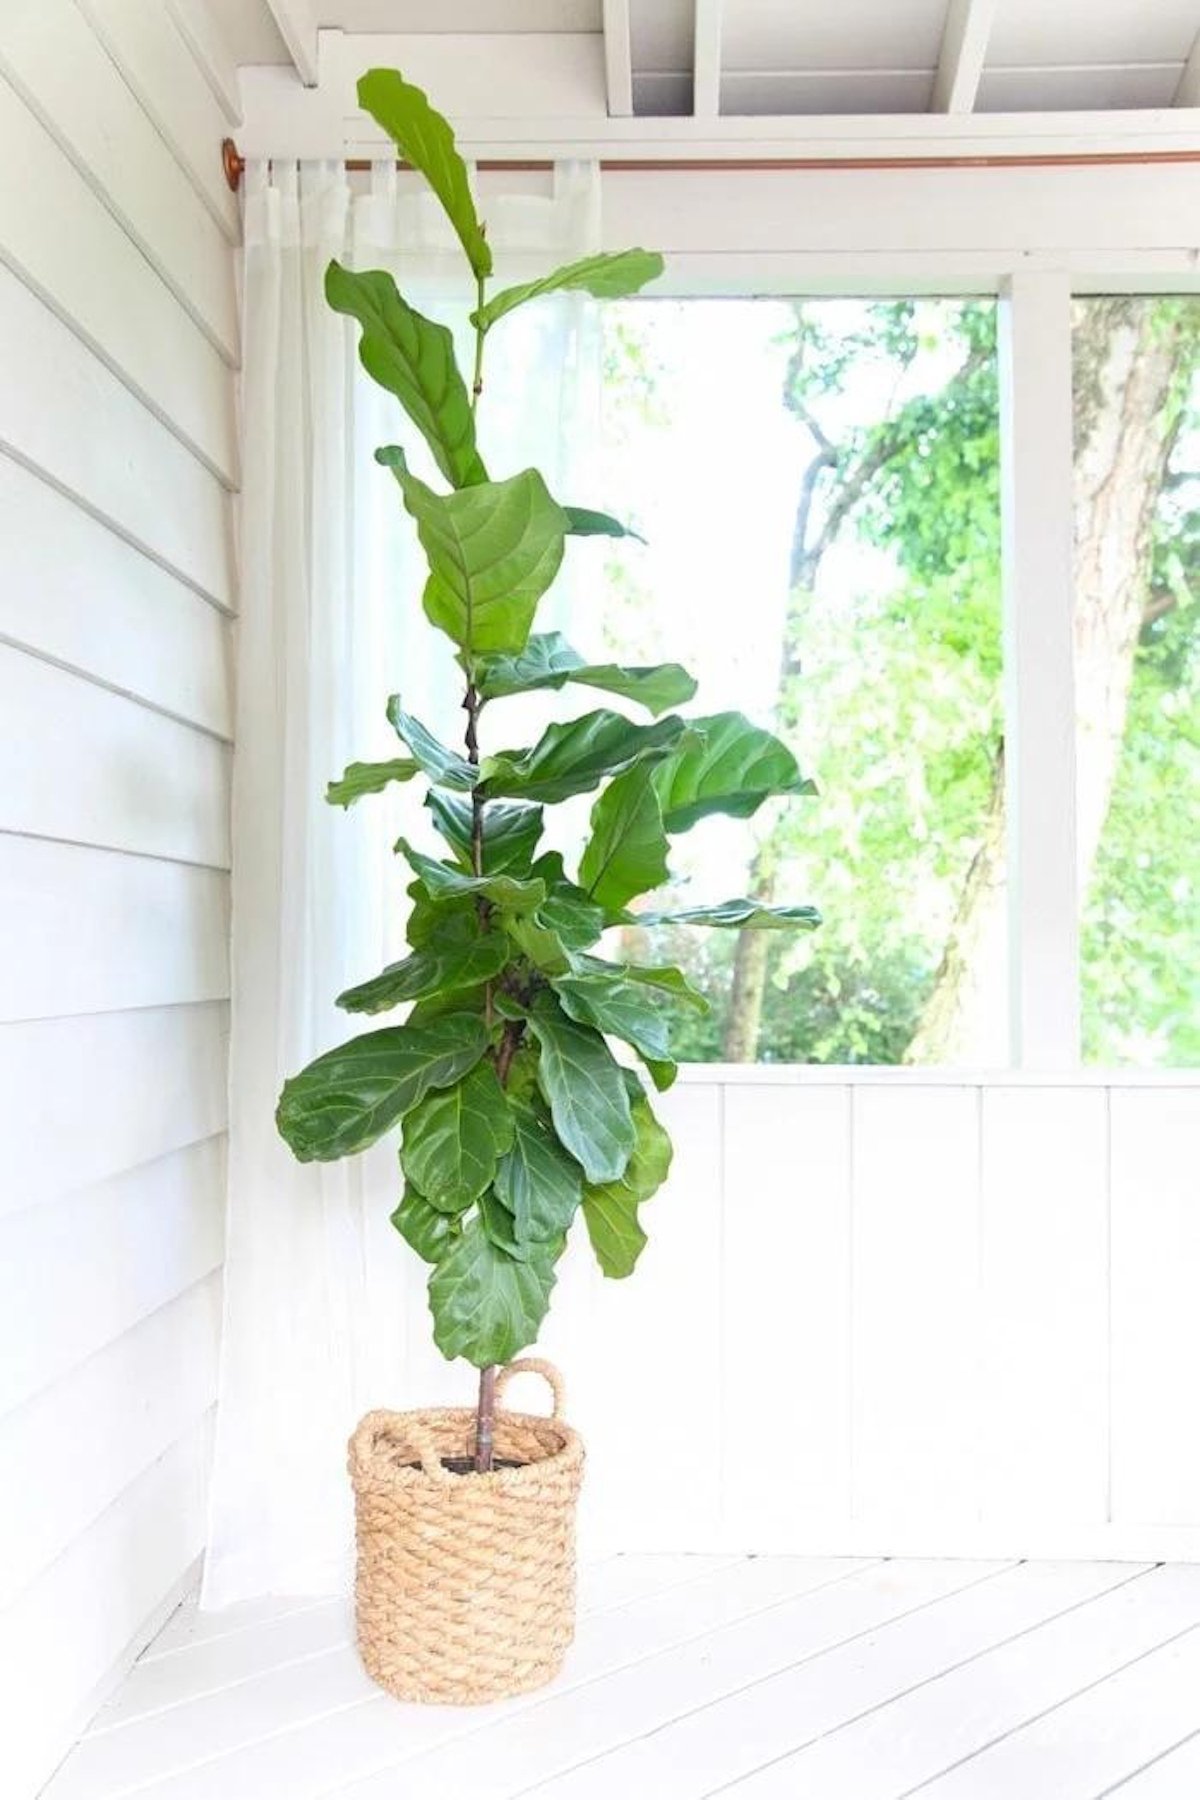 A fiddle leaf fig plant in a woven basket is placed on a white wooden floor in a corner with white walls, featuring diy copper pipe curtain rods and a large window in the background.